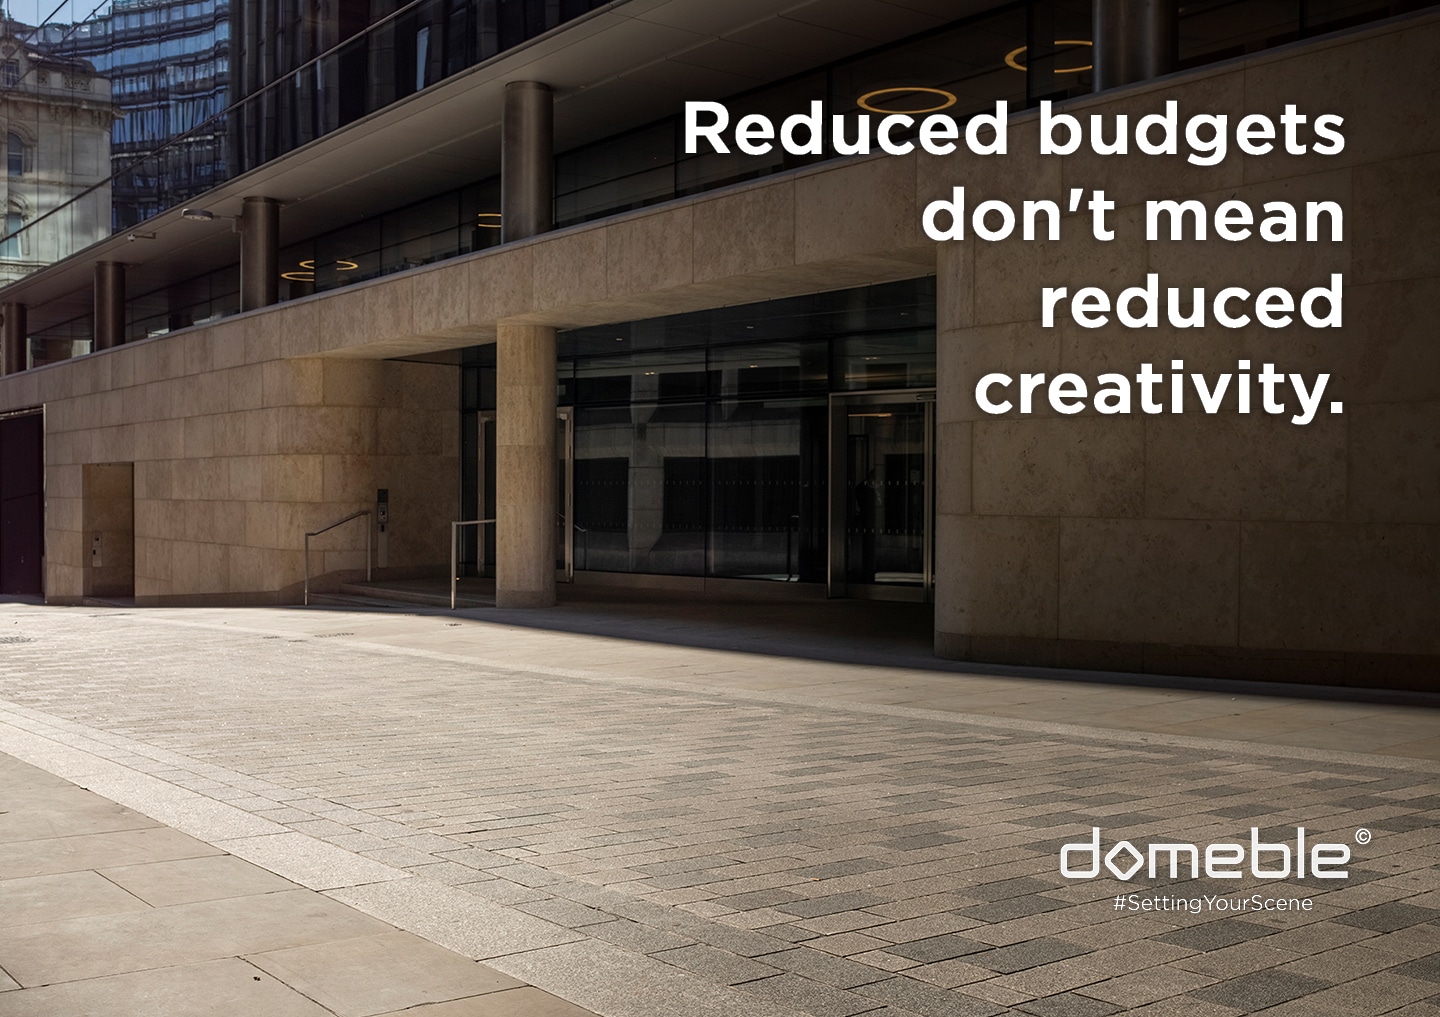 Reduced budgets don’t mean reduced creativity.